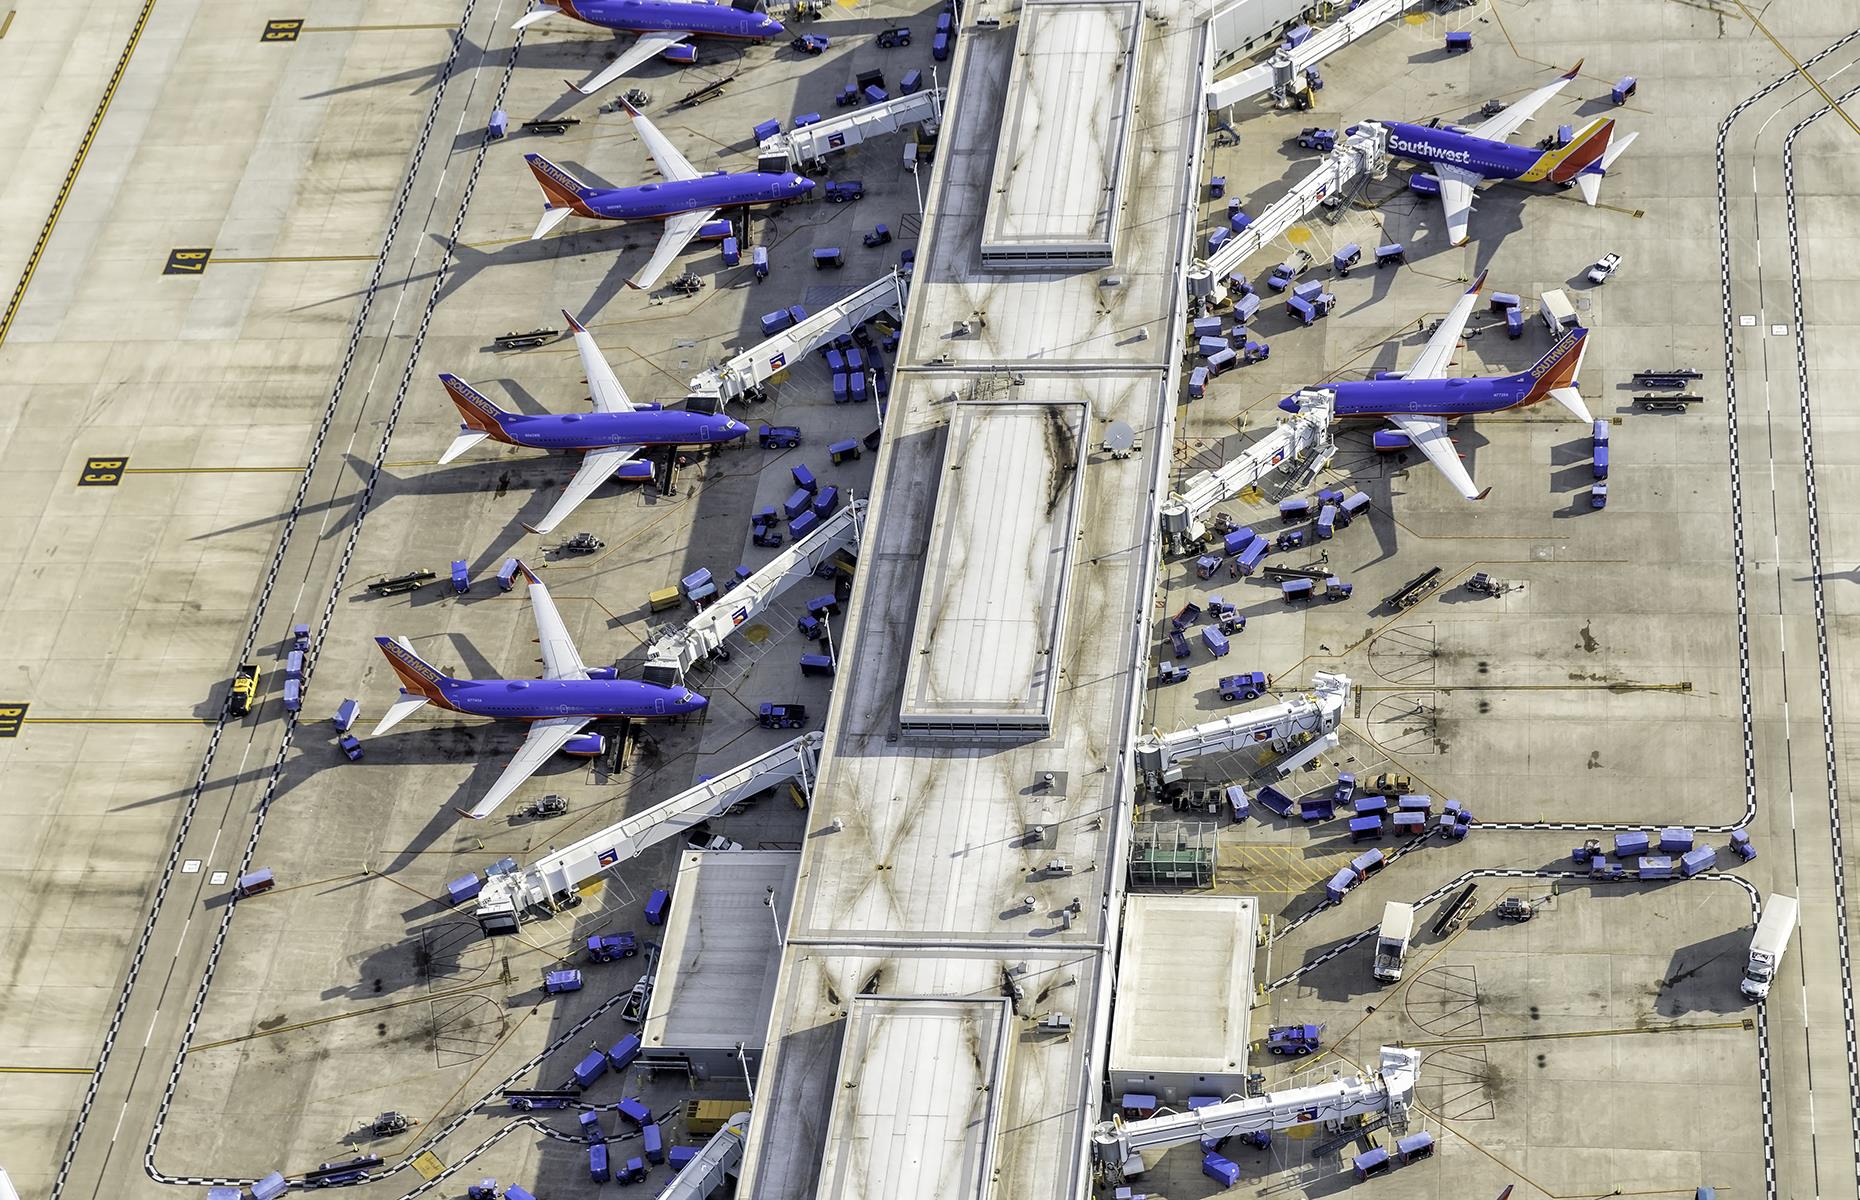 <p>It might be Chicago's secondary airport, but Midway claims to be the 'busiest square mile' in town, with its criss-crossed runways and more than 232,000 flights in 2019. The airport scores slightly below average at 782, with complaints from passengers online saying it's outdated and that renovation works are constant. </p>